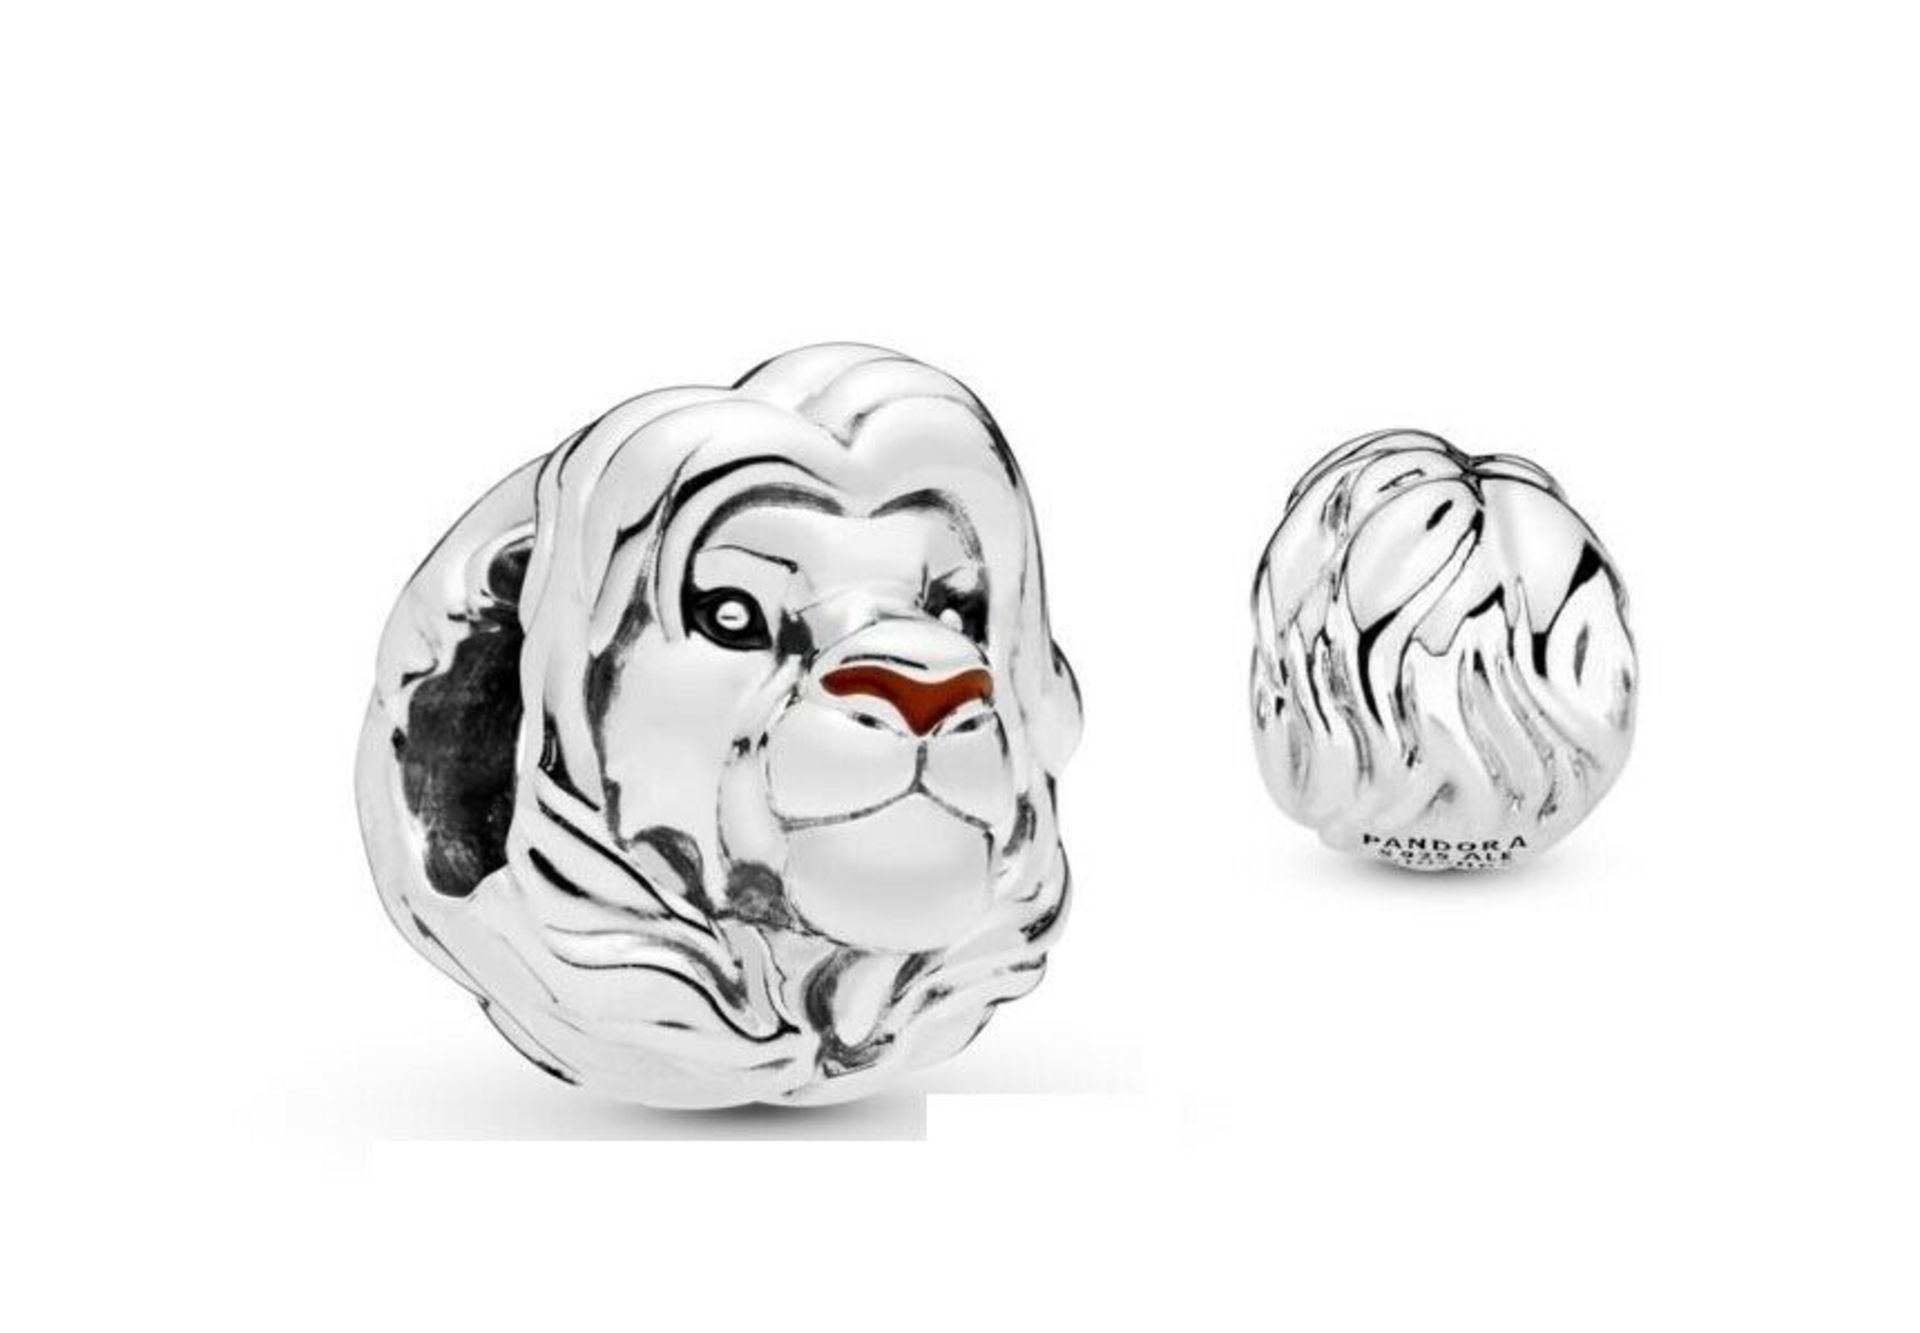 Pandora Disney Lion King Charm 925 Silver in Presentation pouch & comes with gift bag (ideal